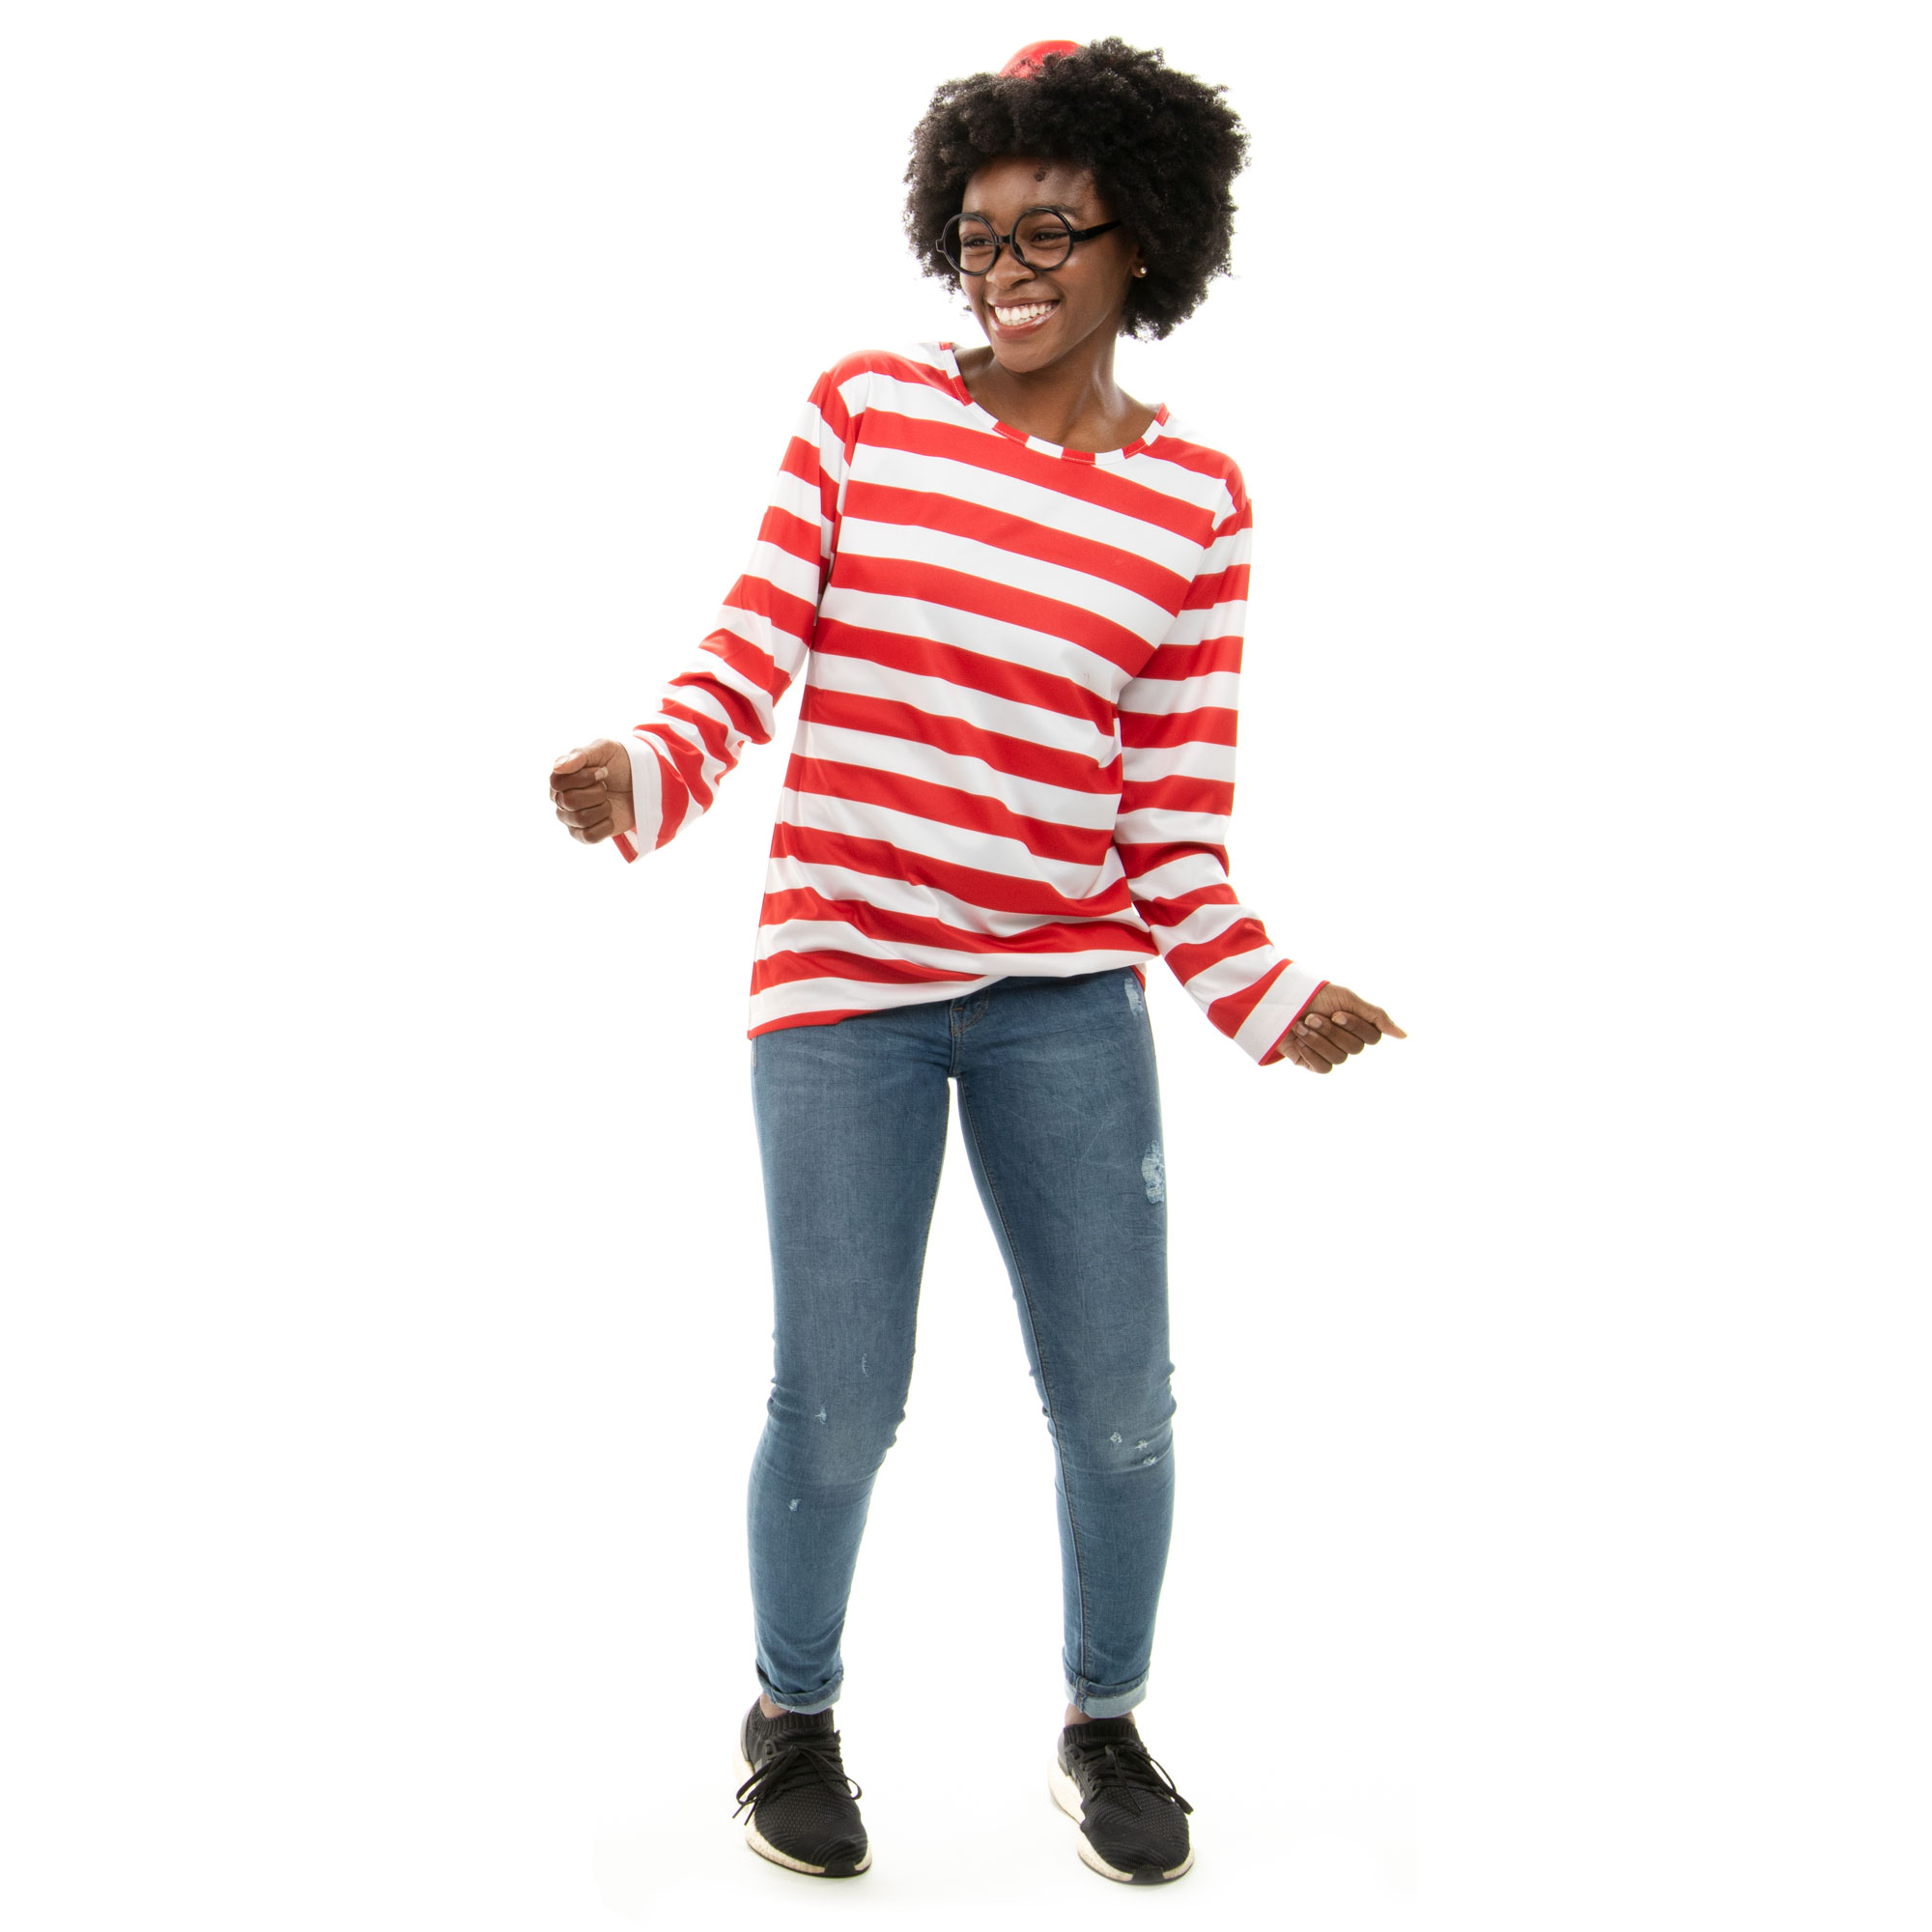 Where's Wally Halloween Costume - Women's Cosplay Outfit, S